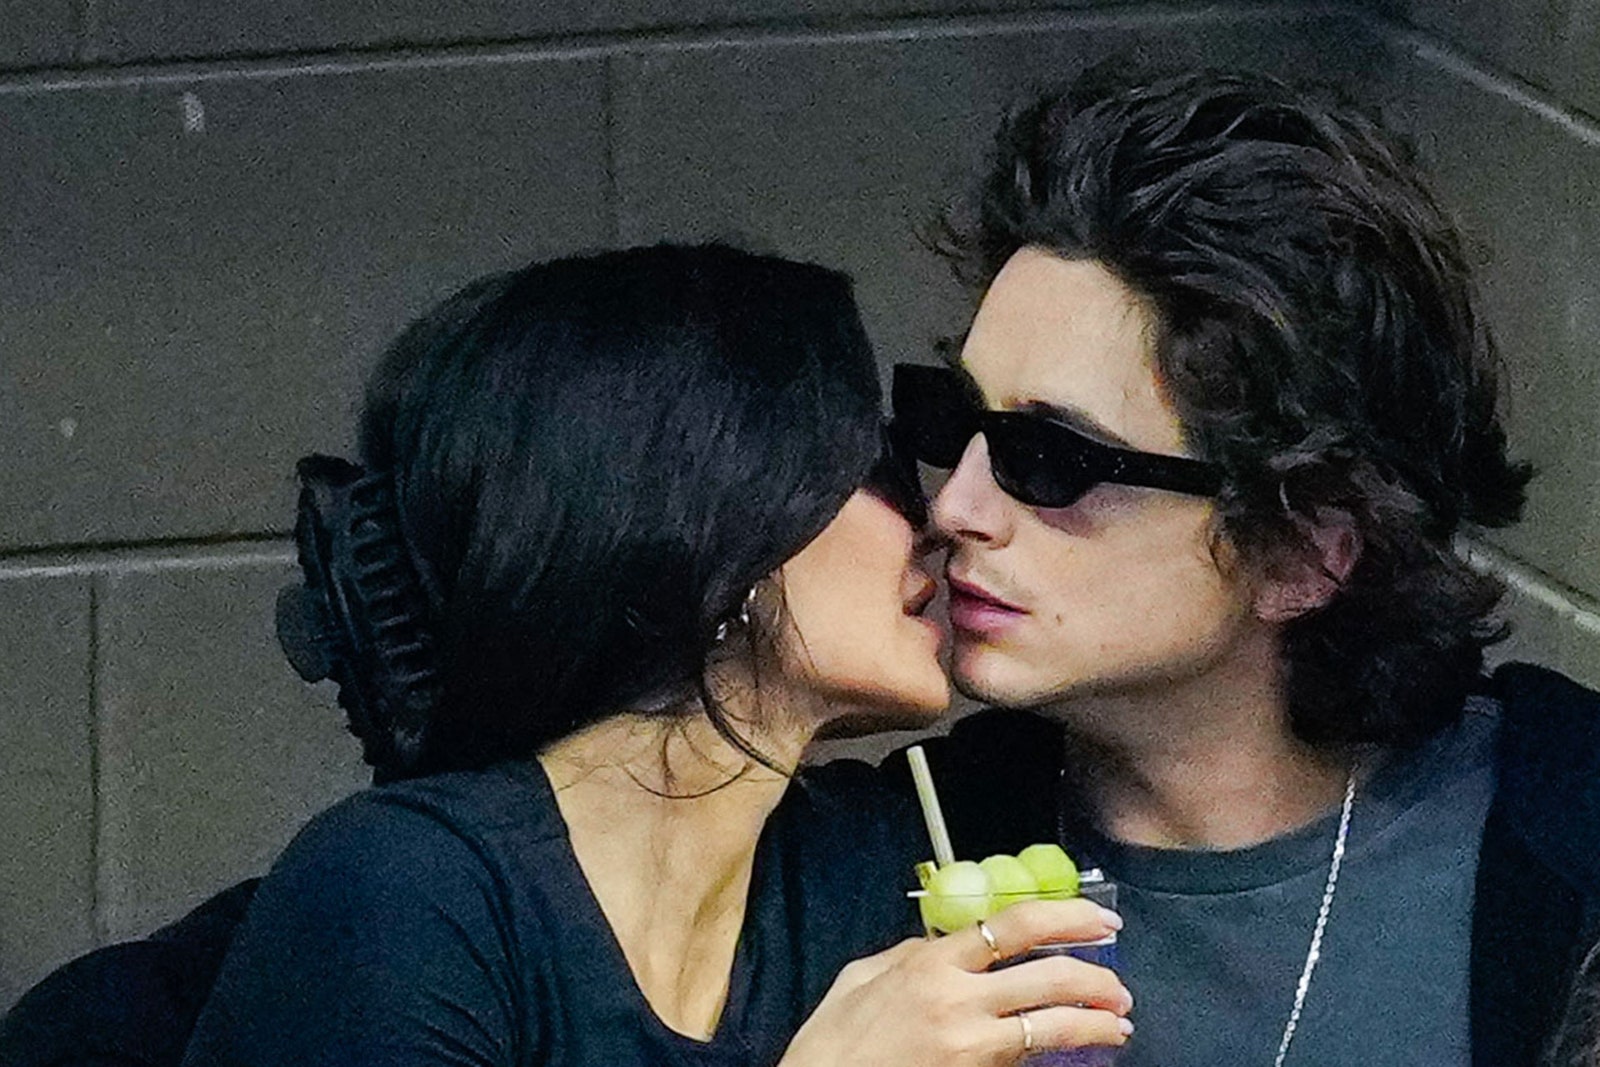 Kylie Jenner and Timothe Chalamet A Timeline Of Their Relationship